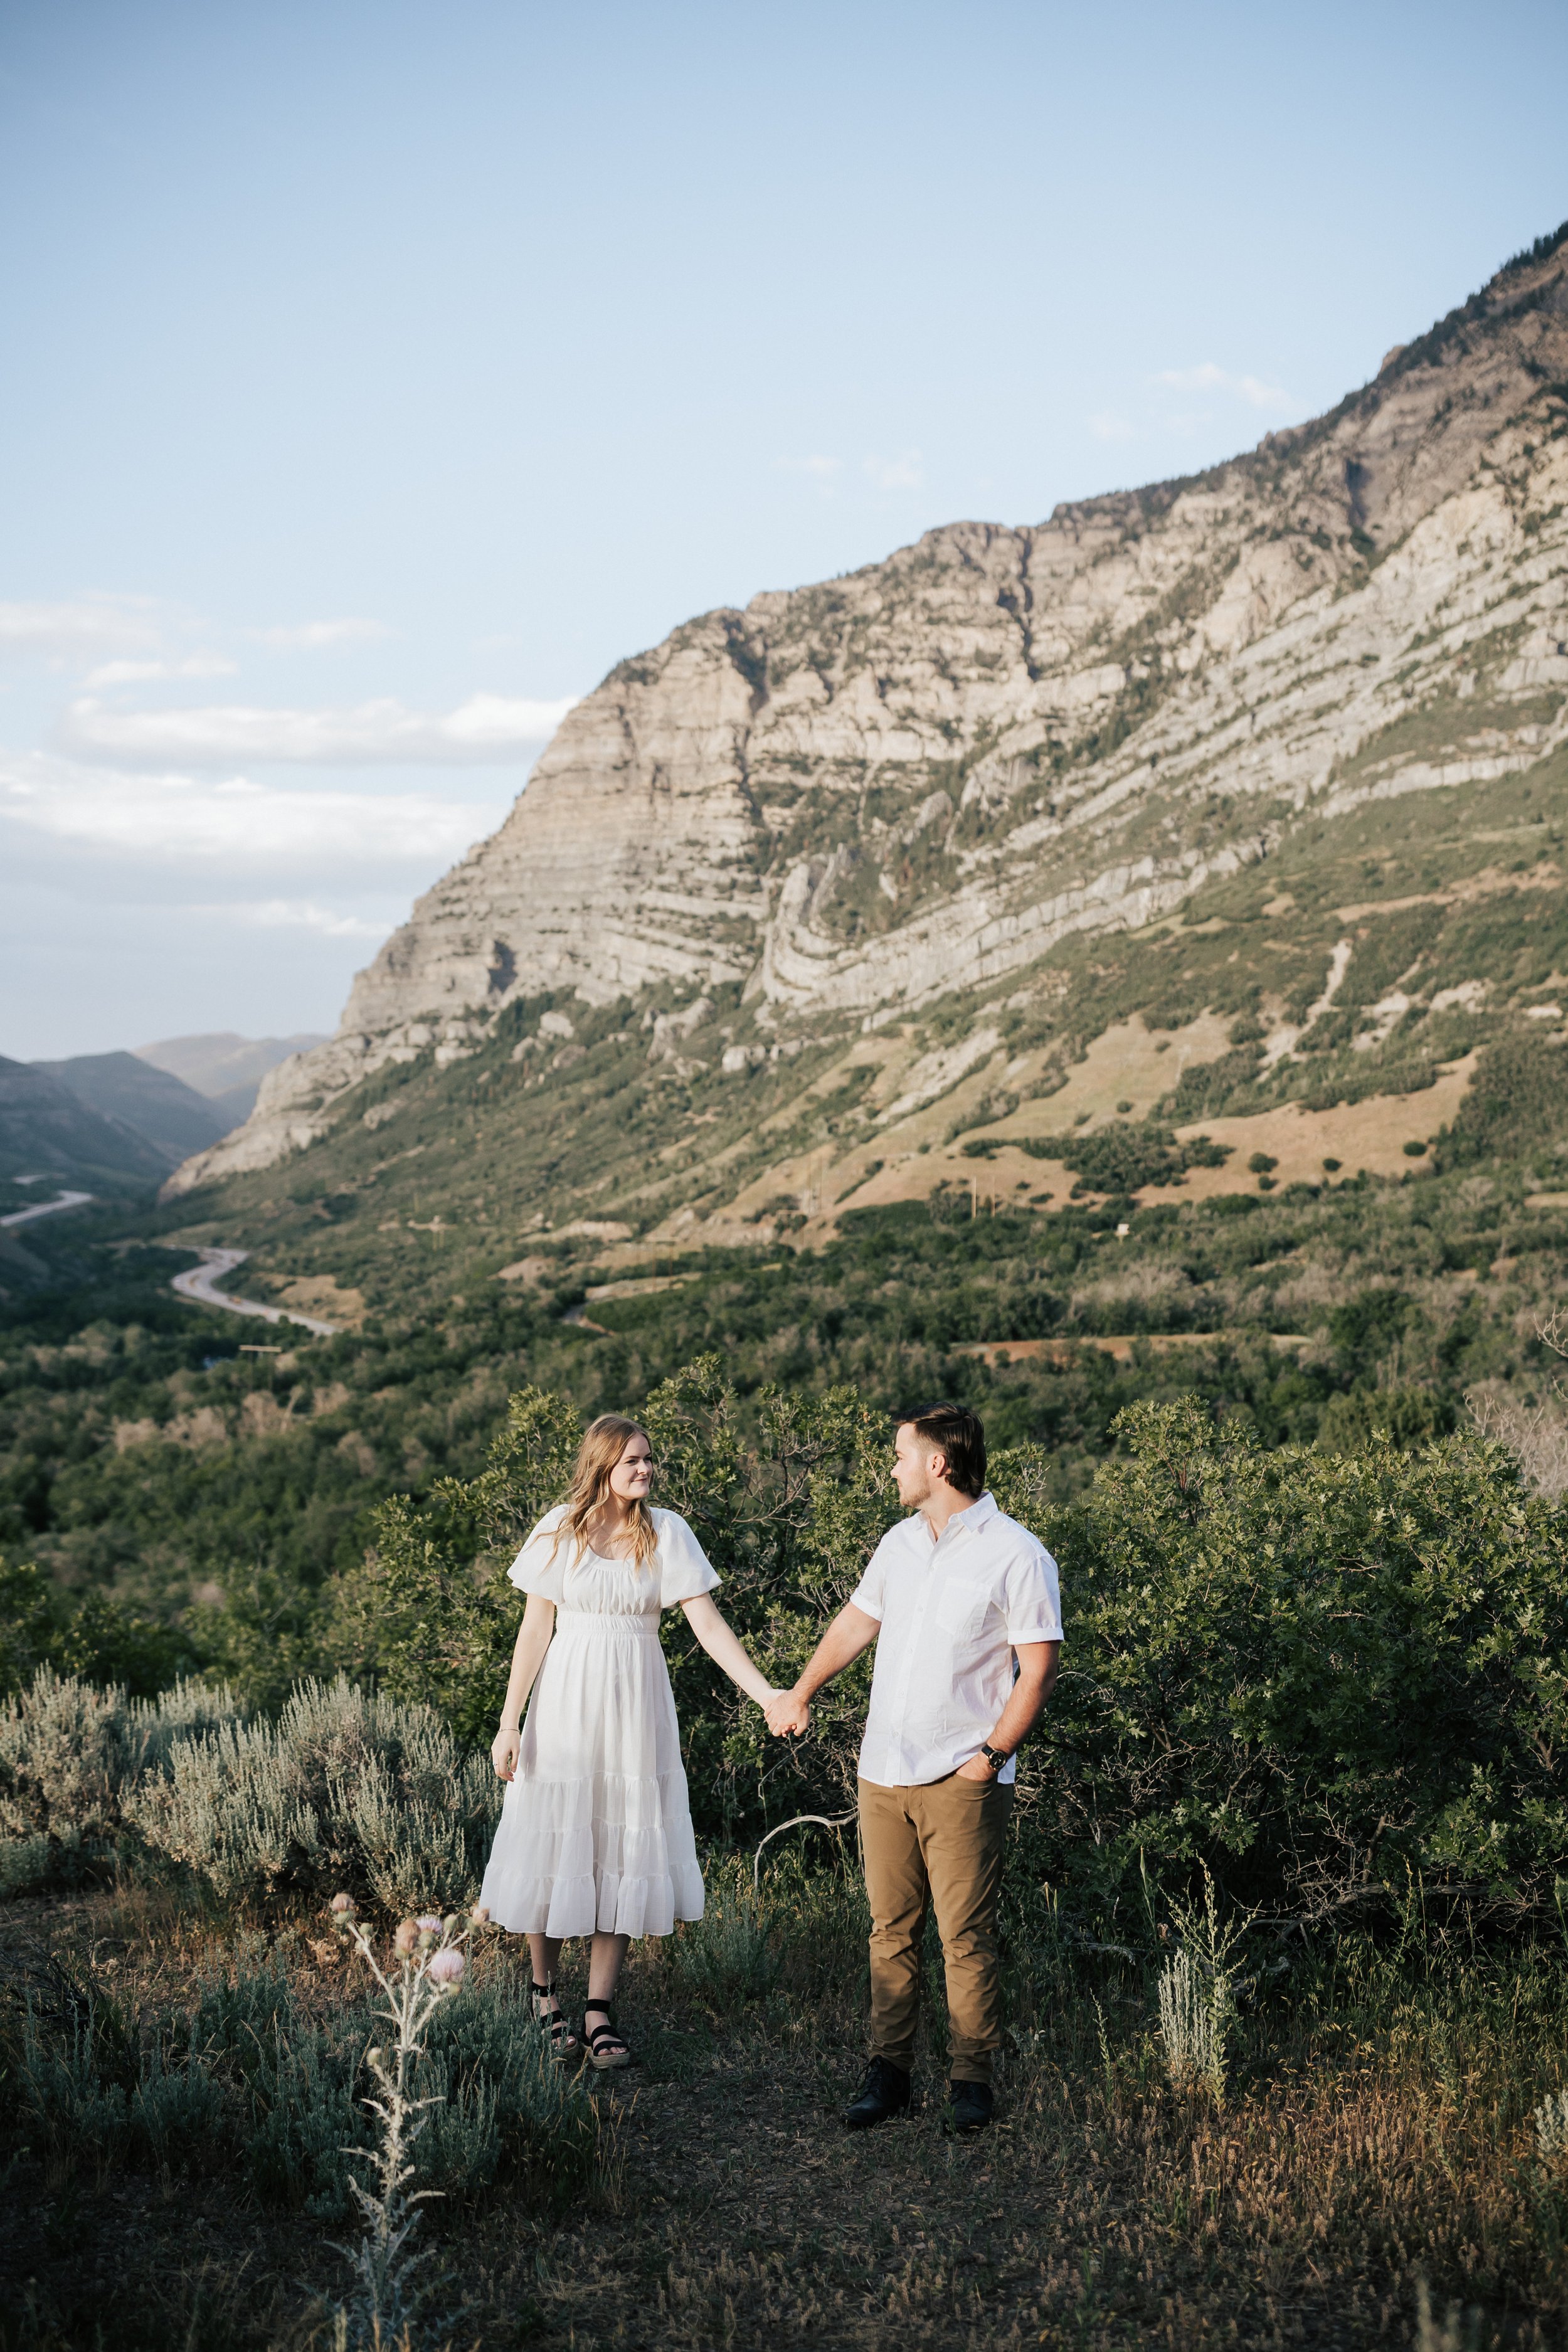  Summer anniversary couples session in the mountains. A young couple walks around the mountains. Utah photographer. Engagement session. #utahphotographer #utahengagements  